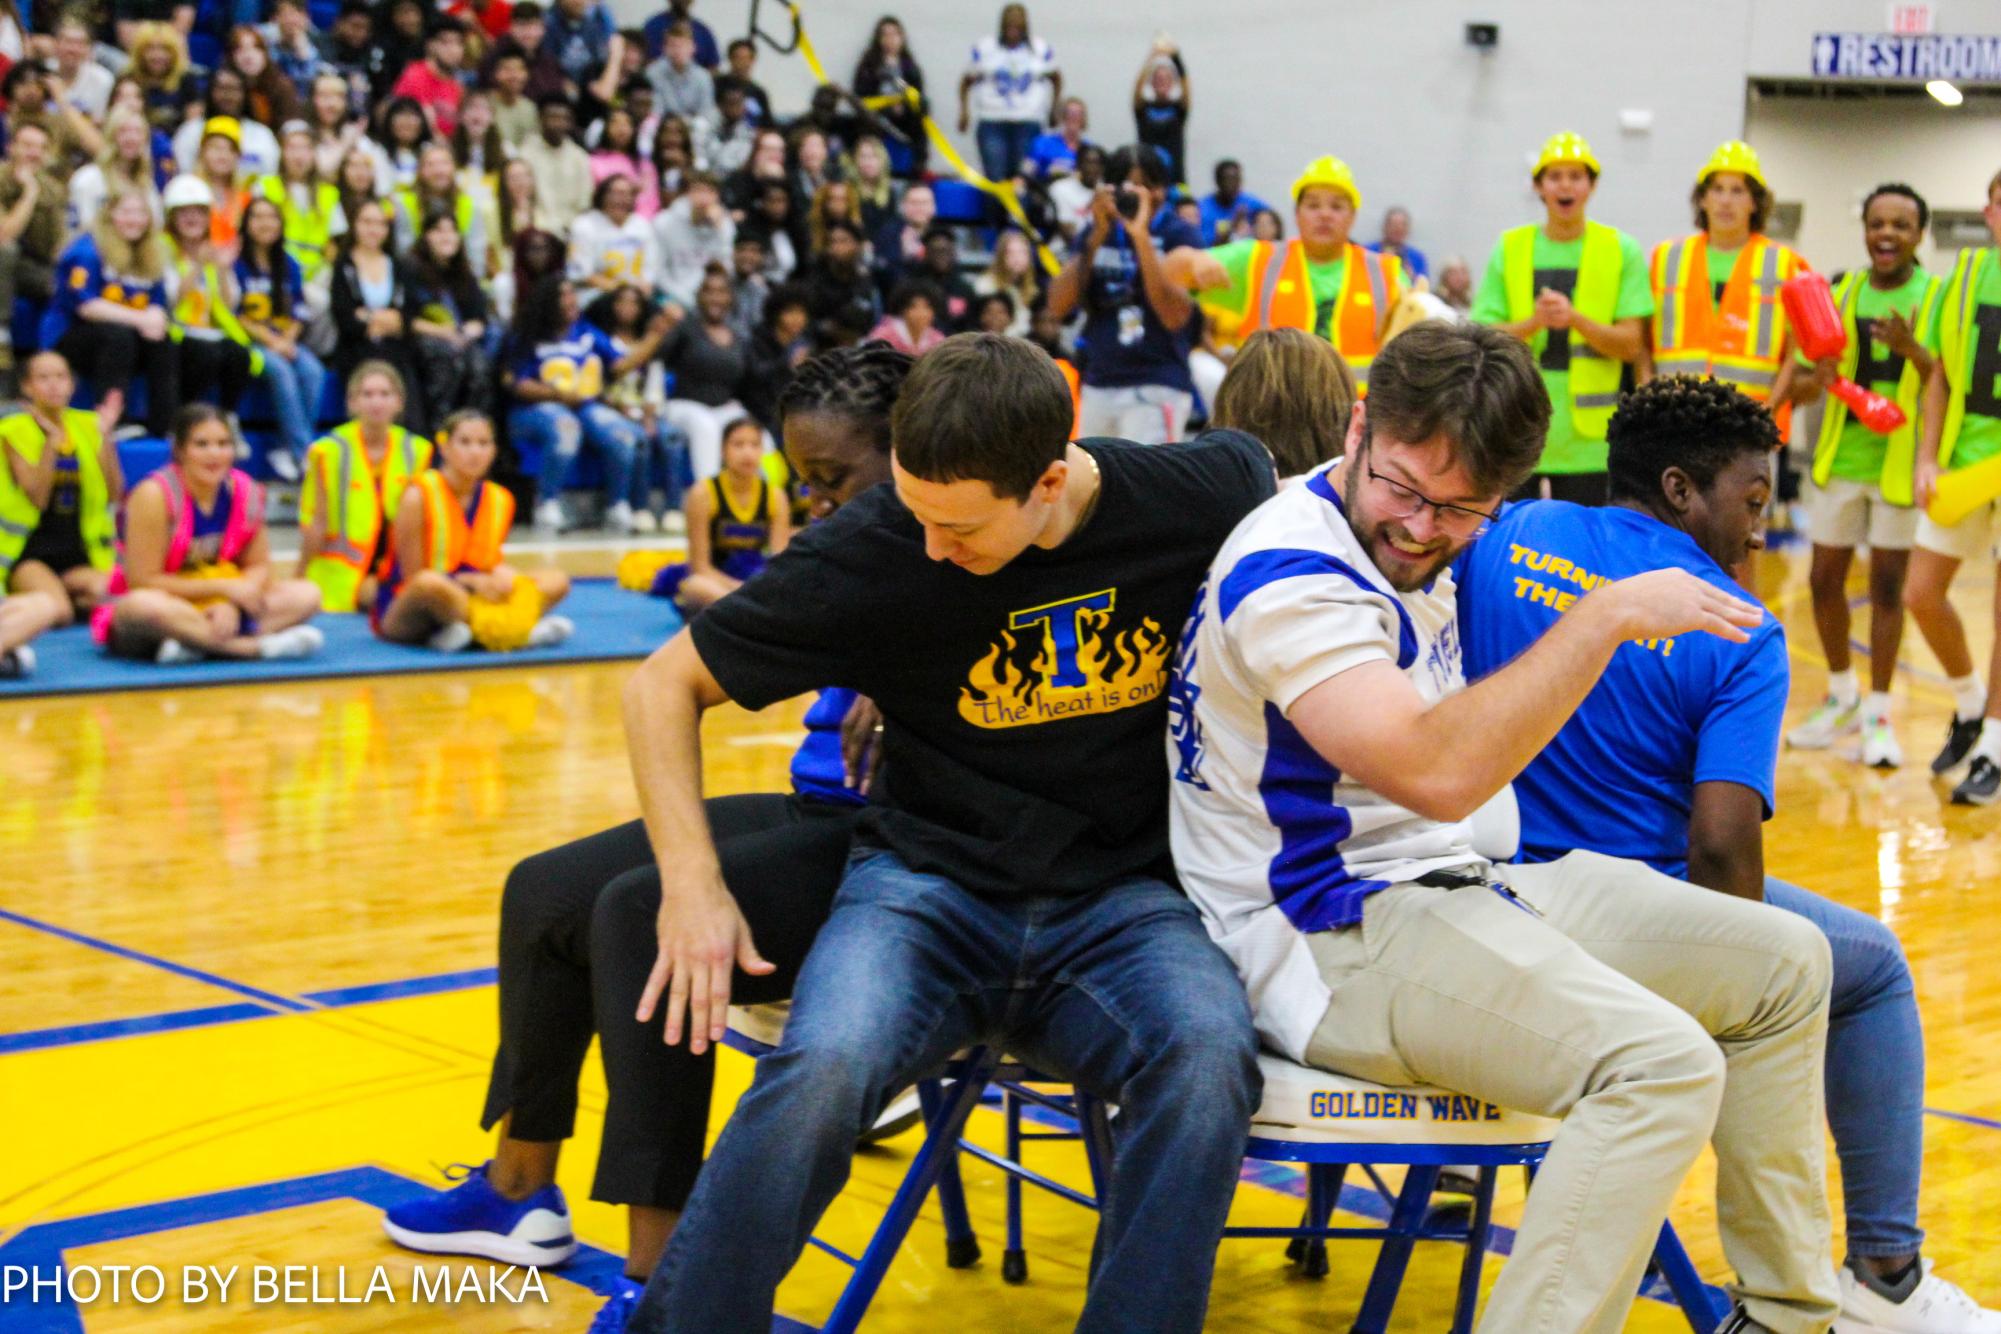 First+Pep+Rally+Hits+High+Note%3A+Teachers+Compete+in+Musical+Chairs+Showdown